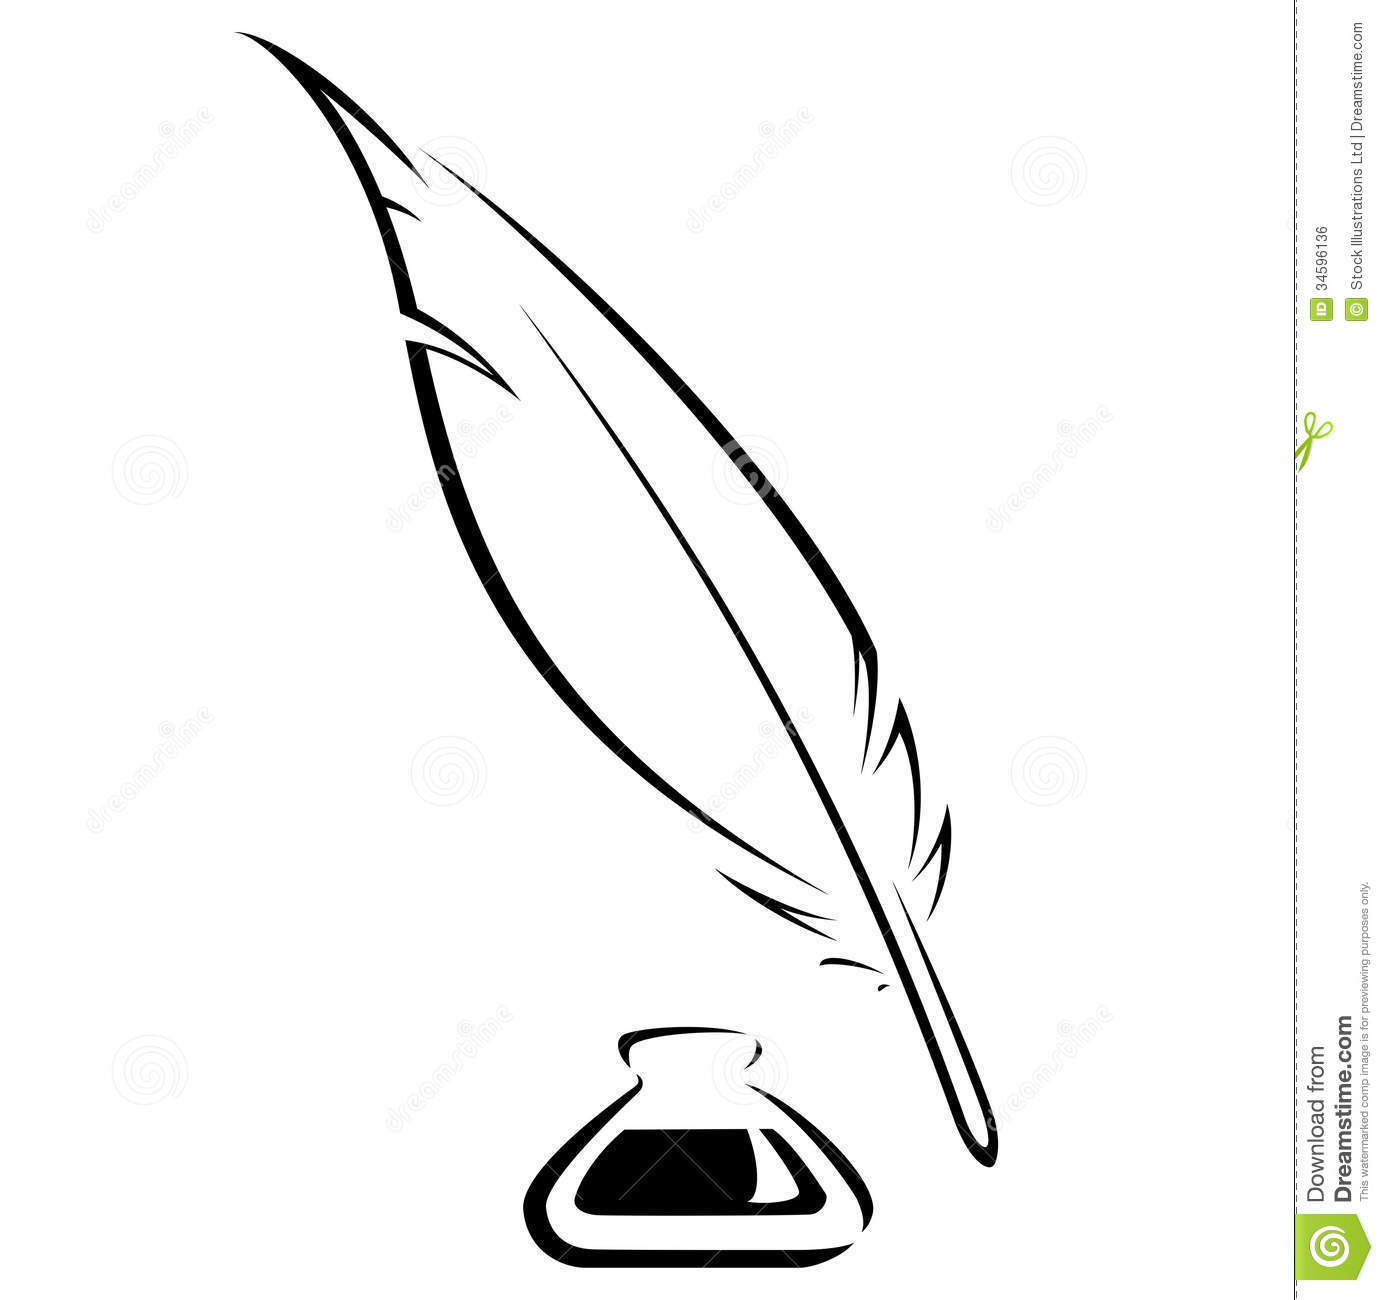 Quill And Ink Pot Black Vector Icon Royalty Free Stock Image   Image